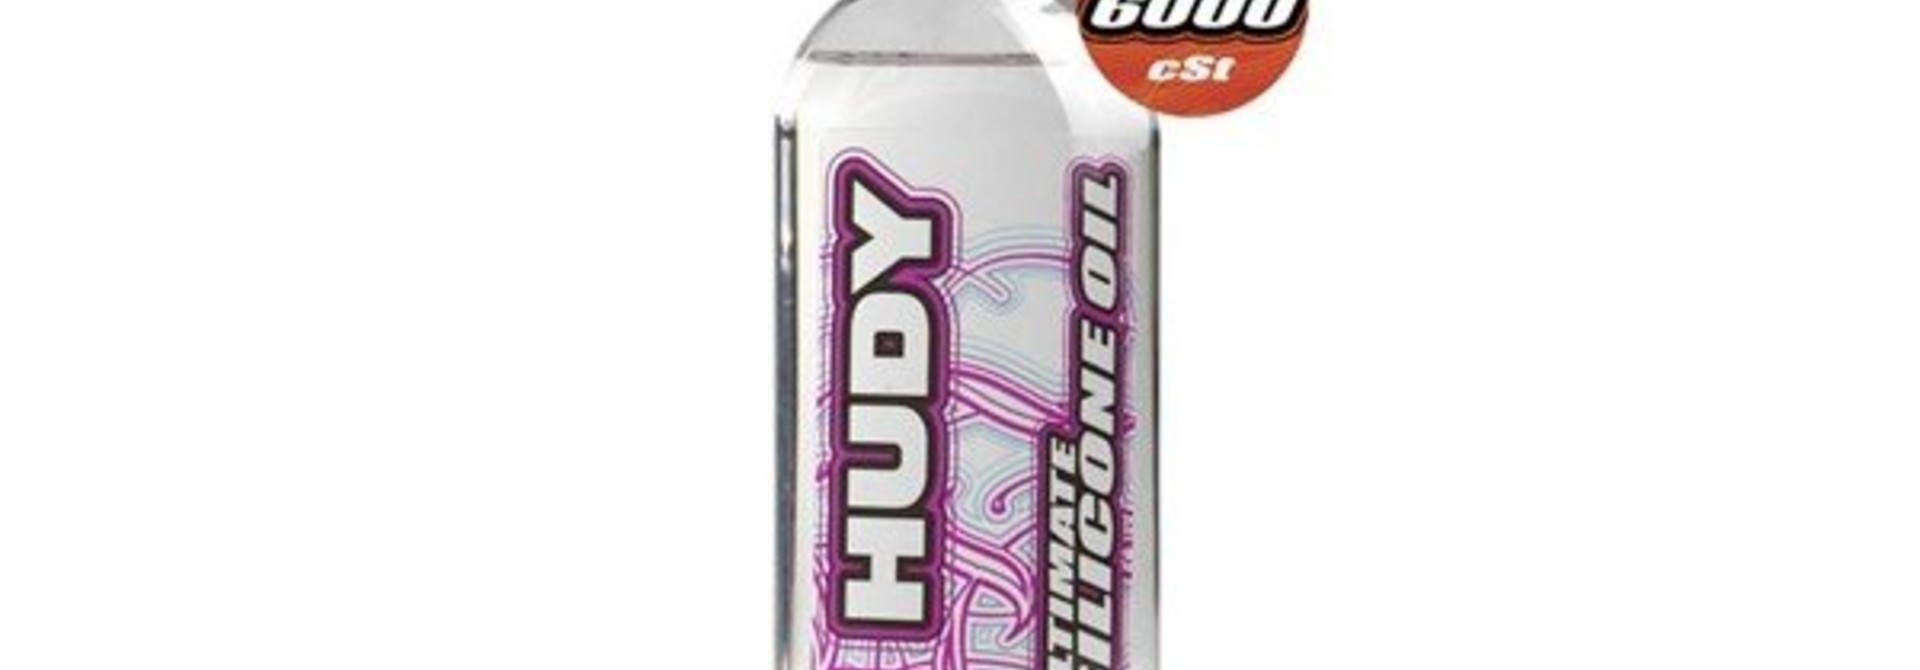 HUDY ULTIMATE SILICONE OIL 6000 cSt - 100ML. H106461